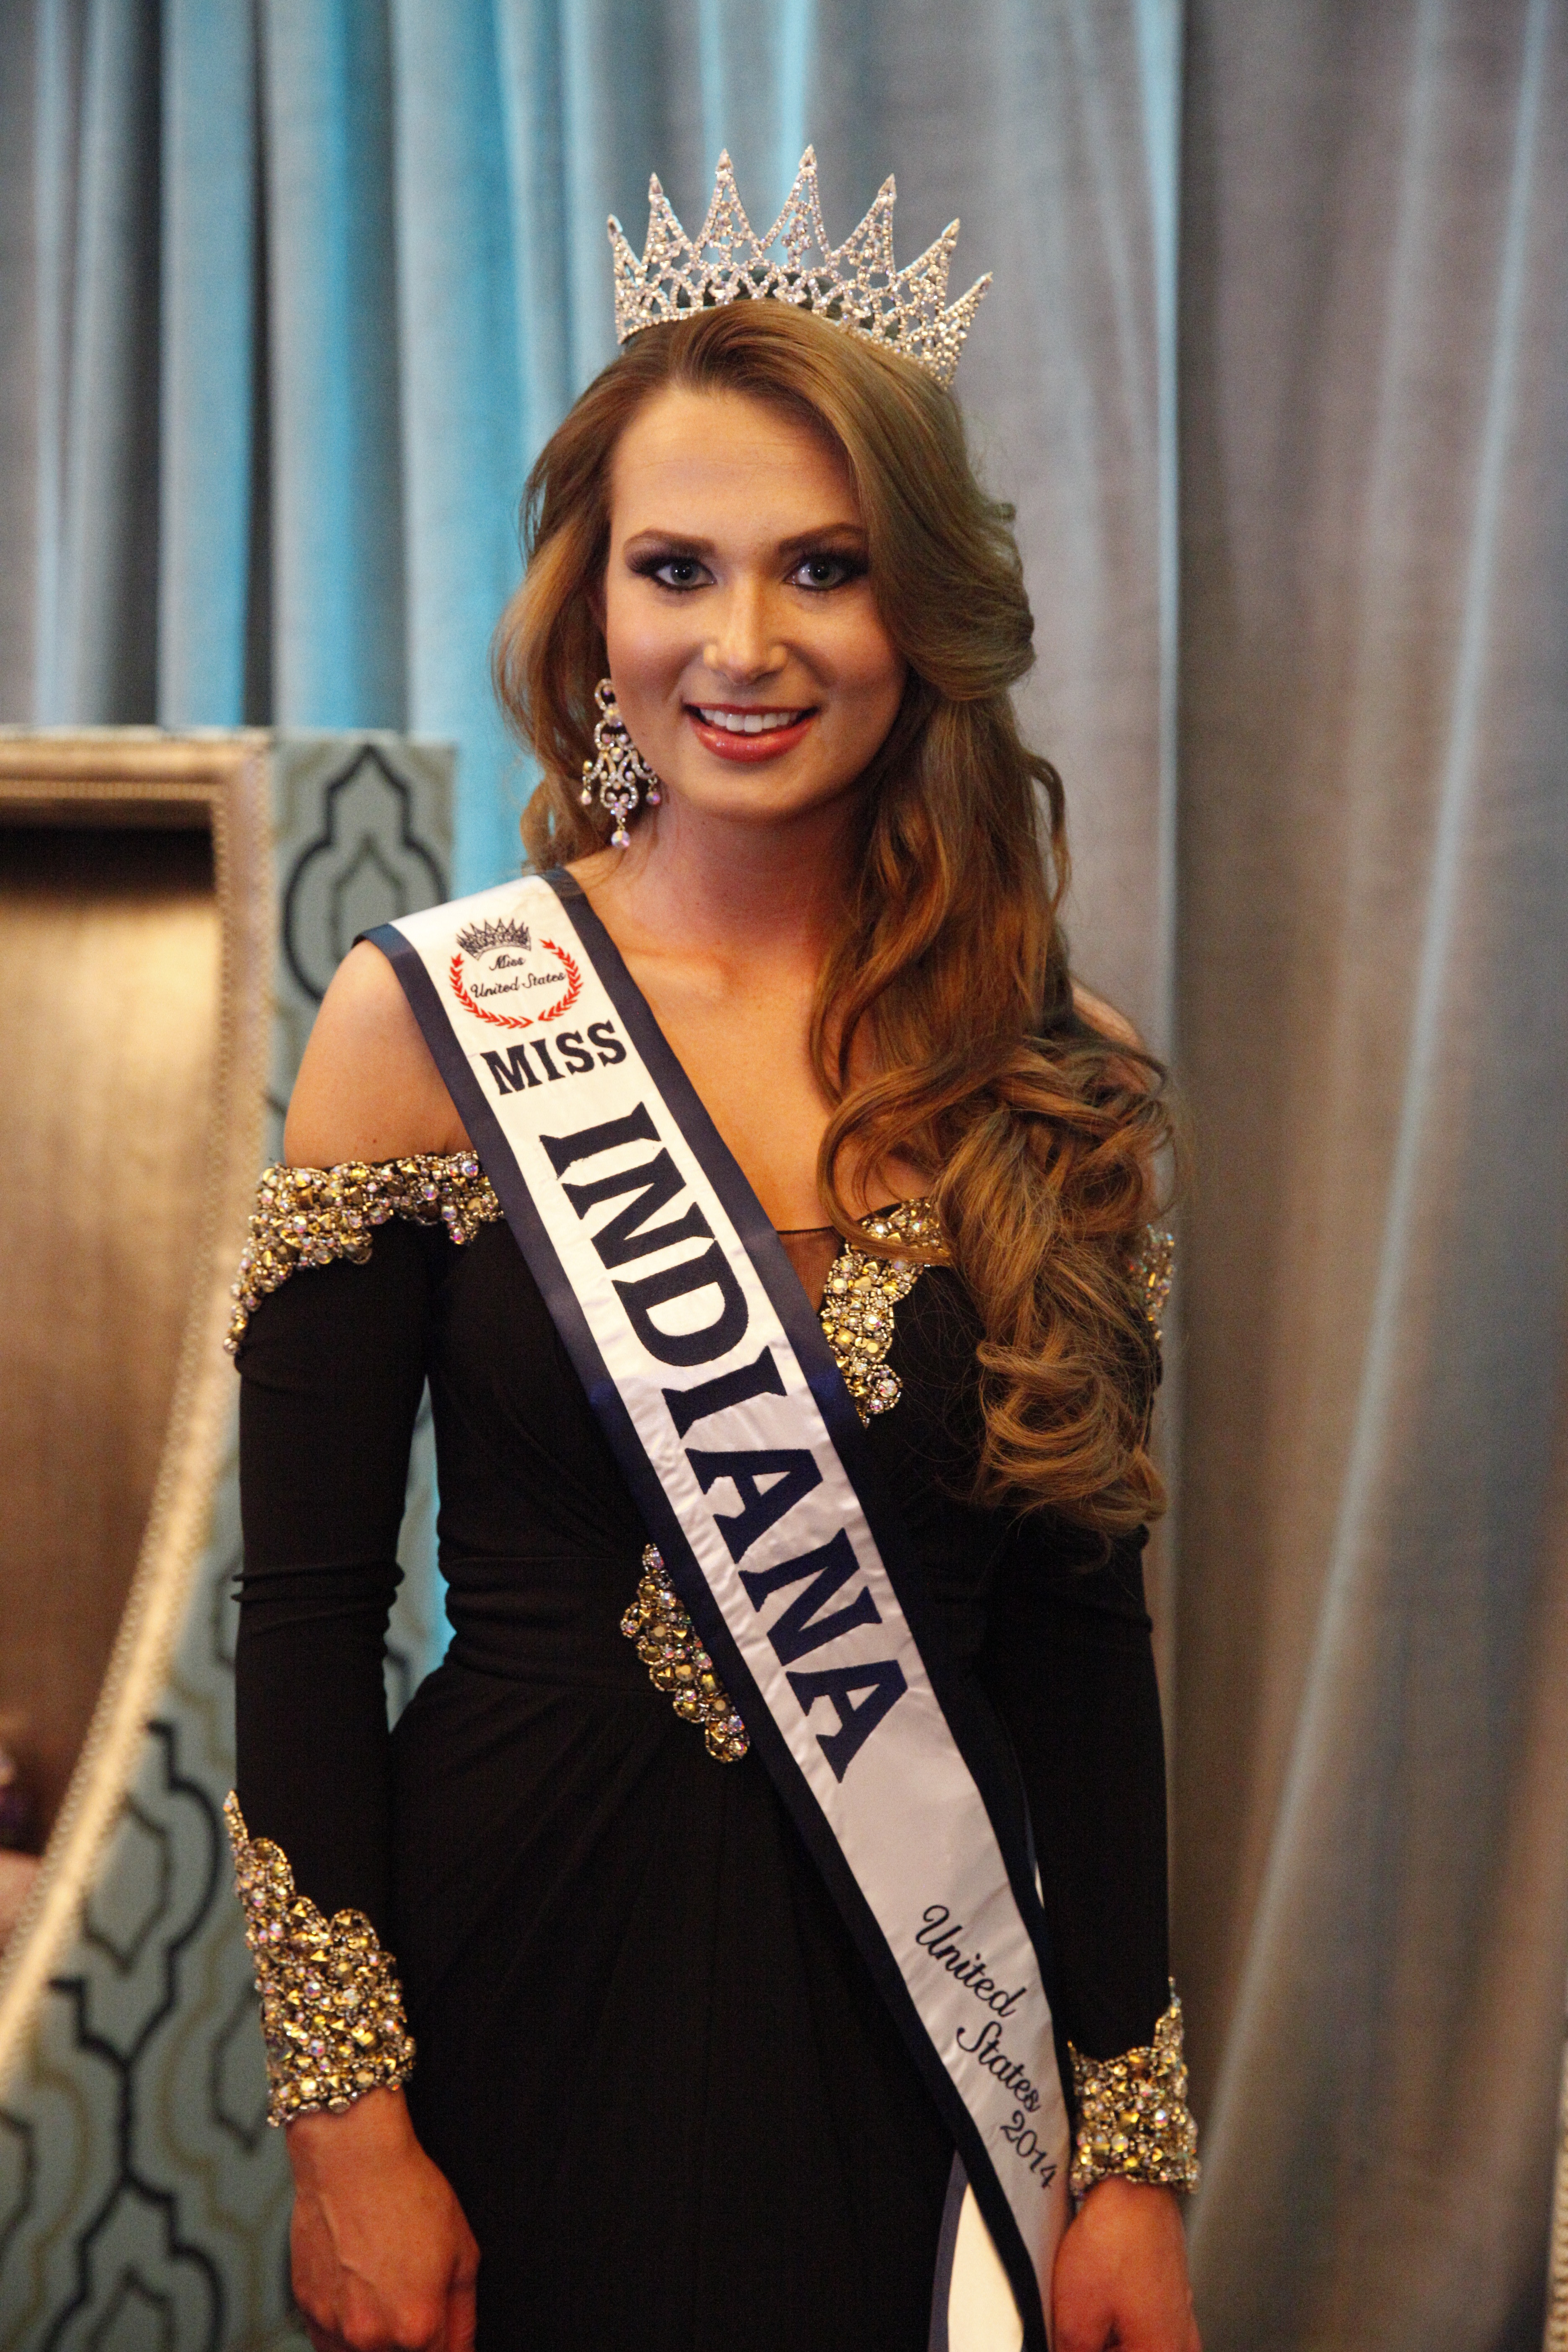 ... crowned "Miss Indiana United States" - University of Southern Indiana